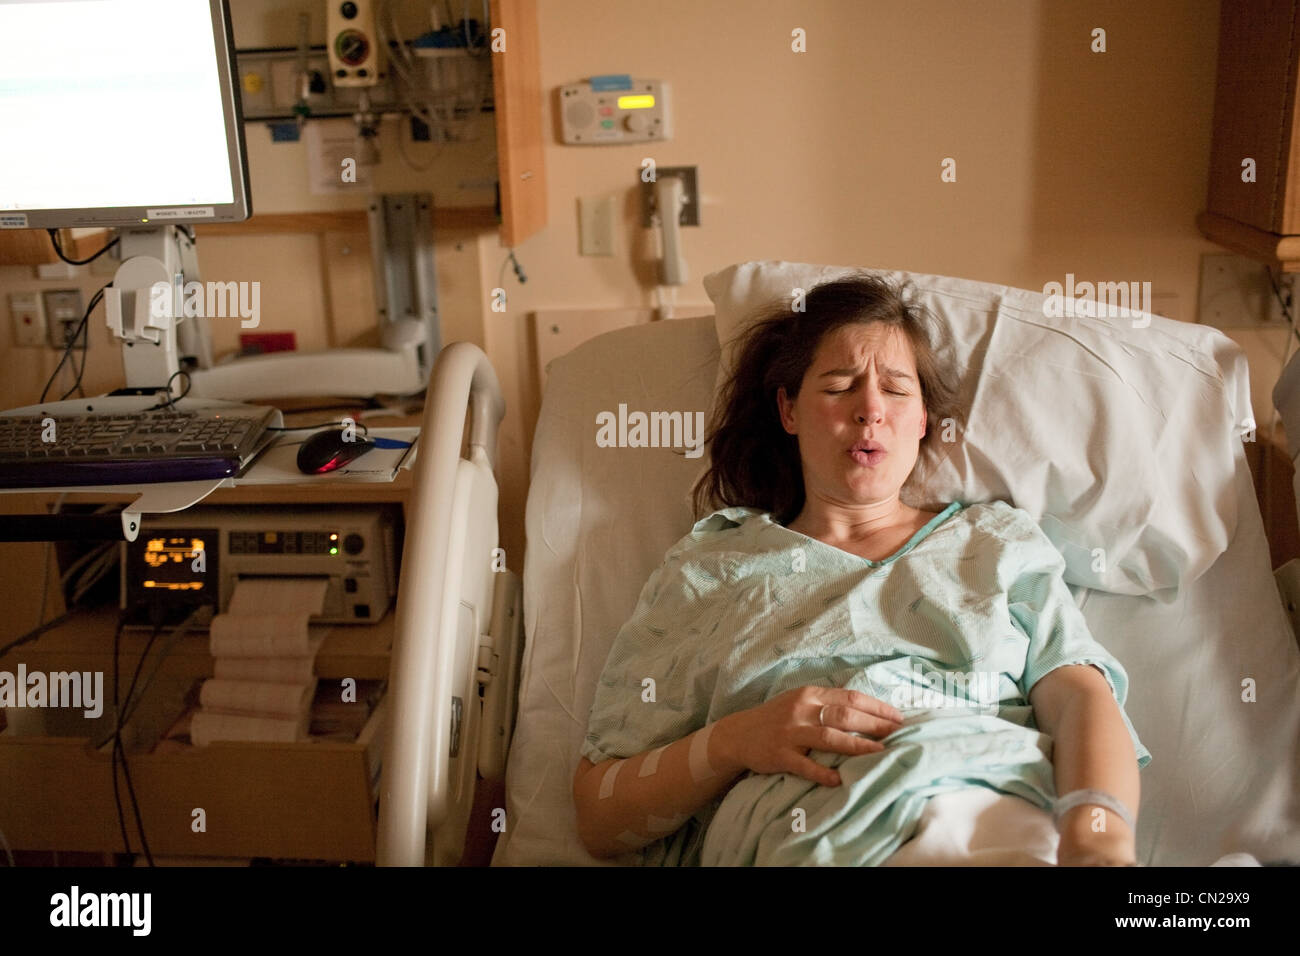 Pregnant woman in labor on hospital bed Stock Photo